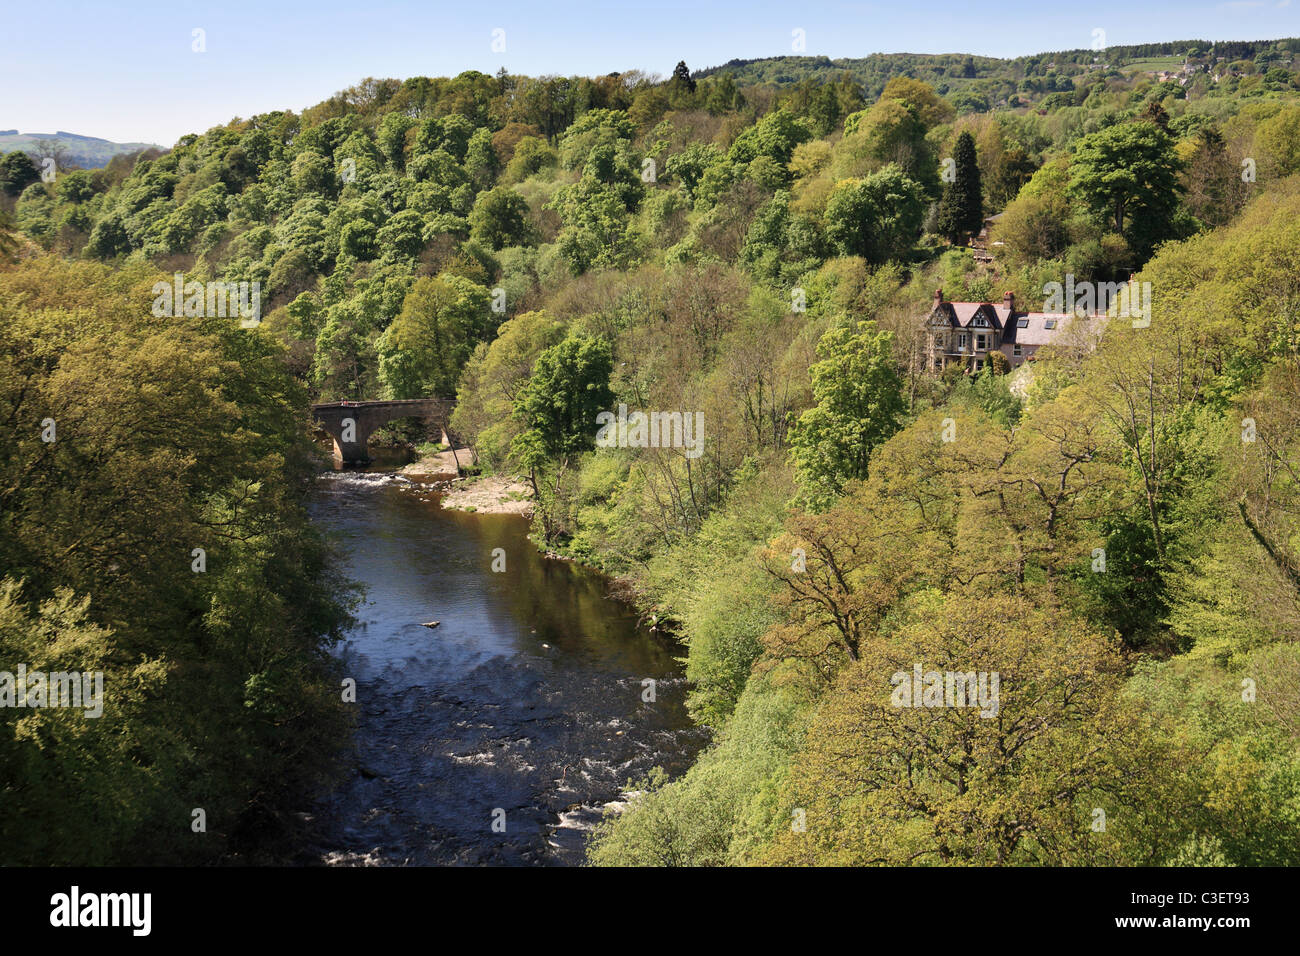 The valley of the River Dee seen from the Pontcysyllte Aqueduct carrying the Llangollen Canal, North Wales, UK Stock Photo